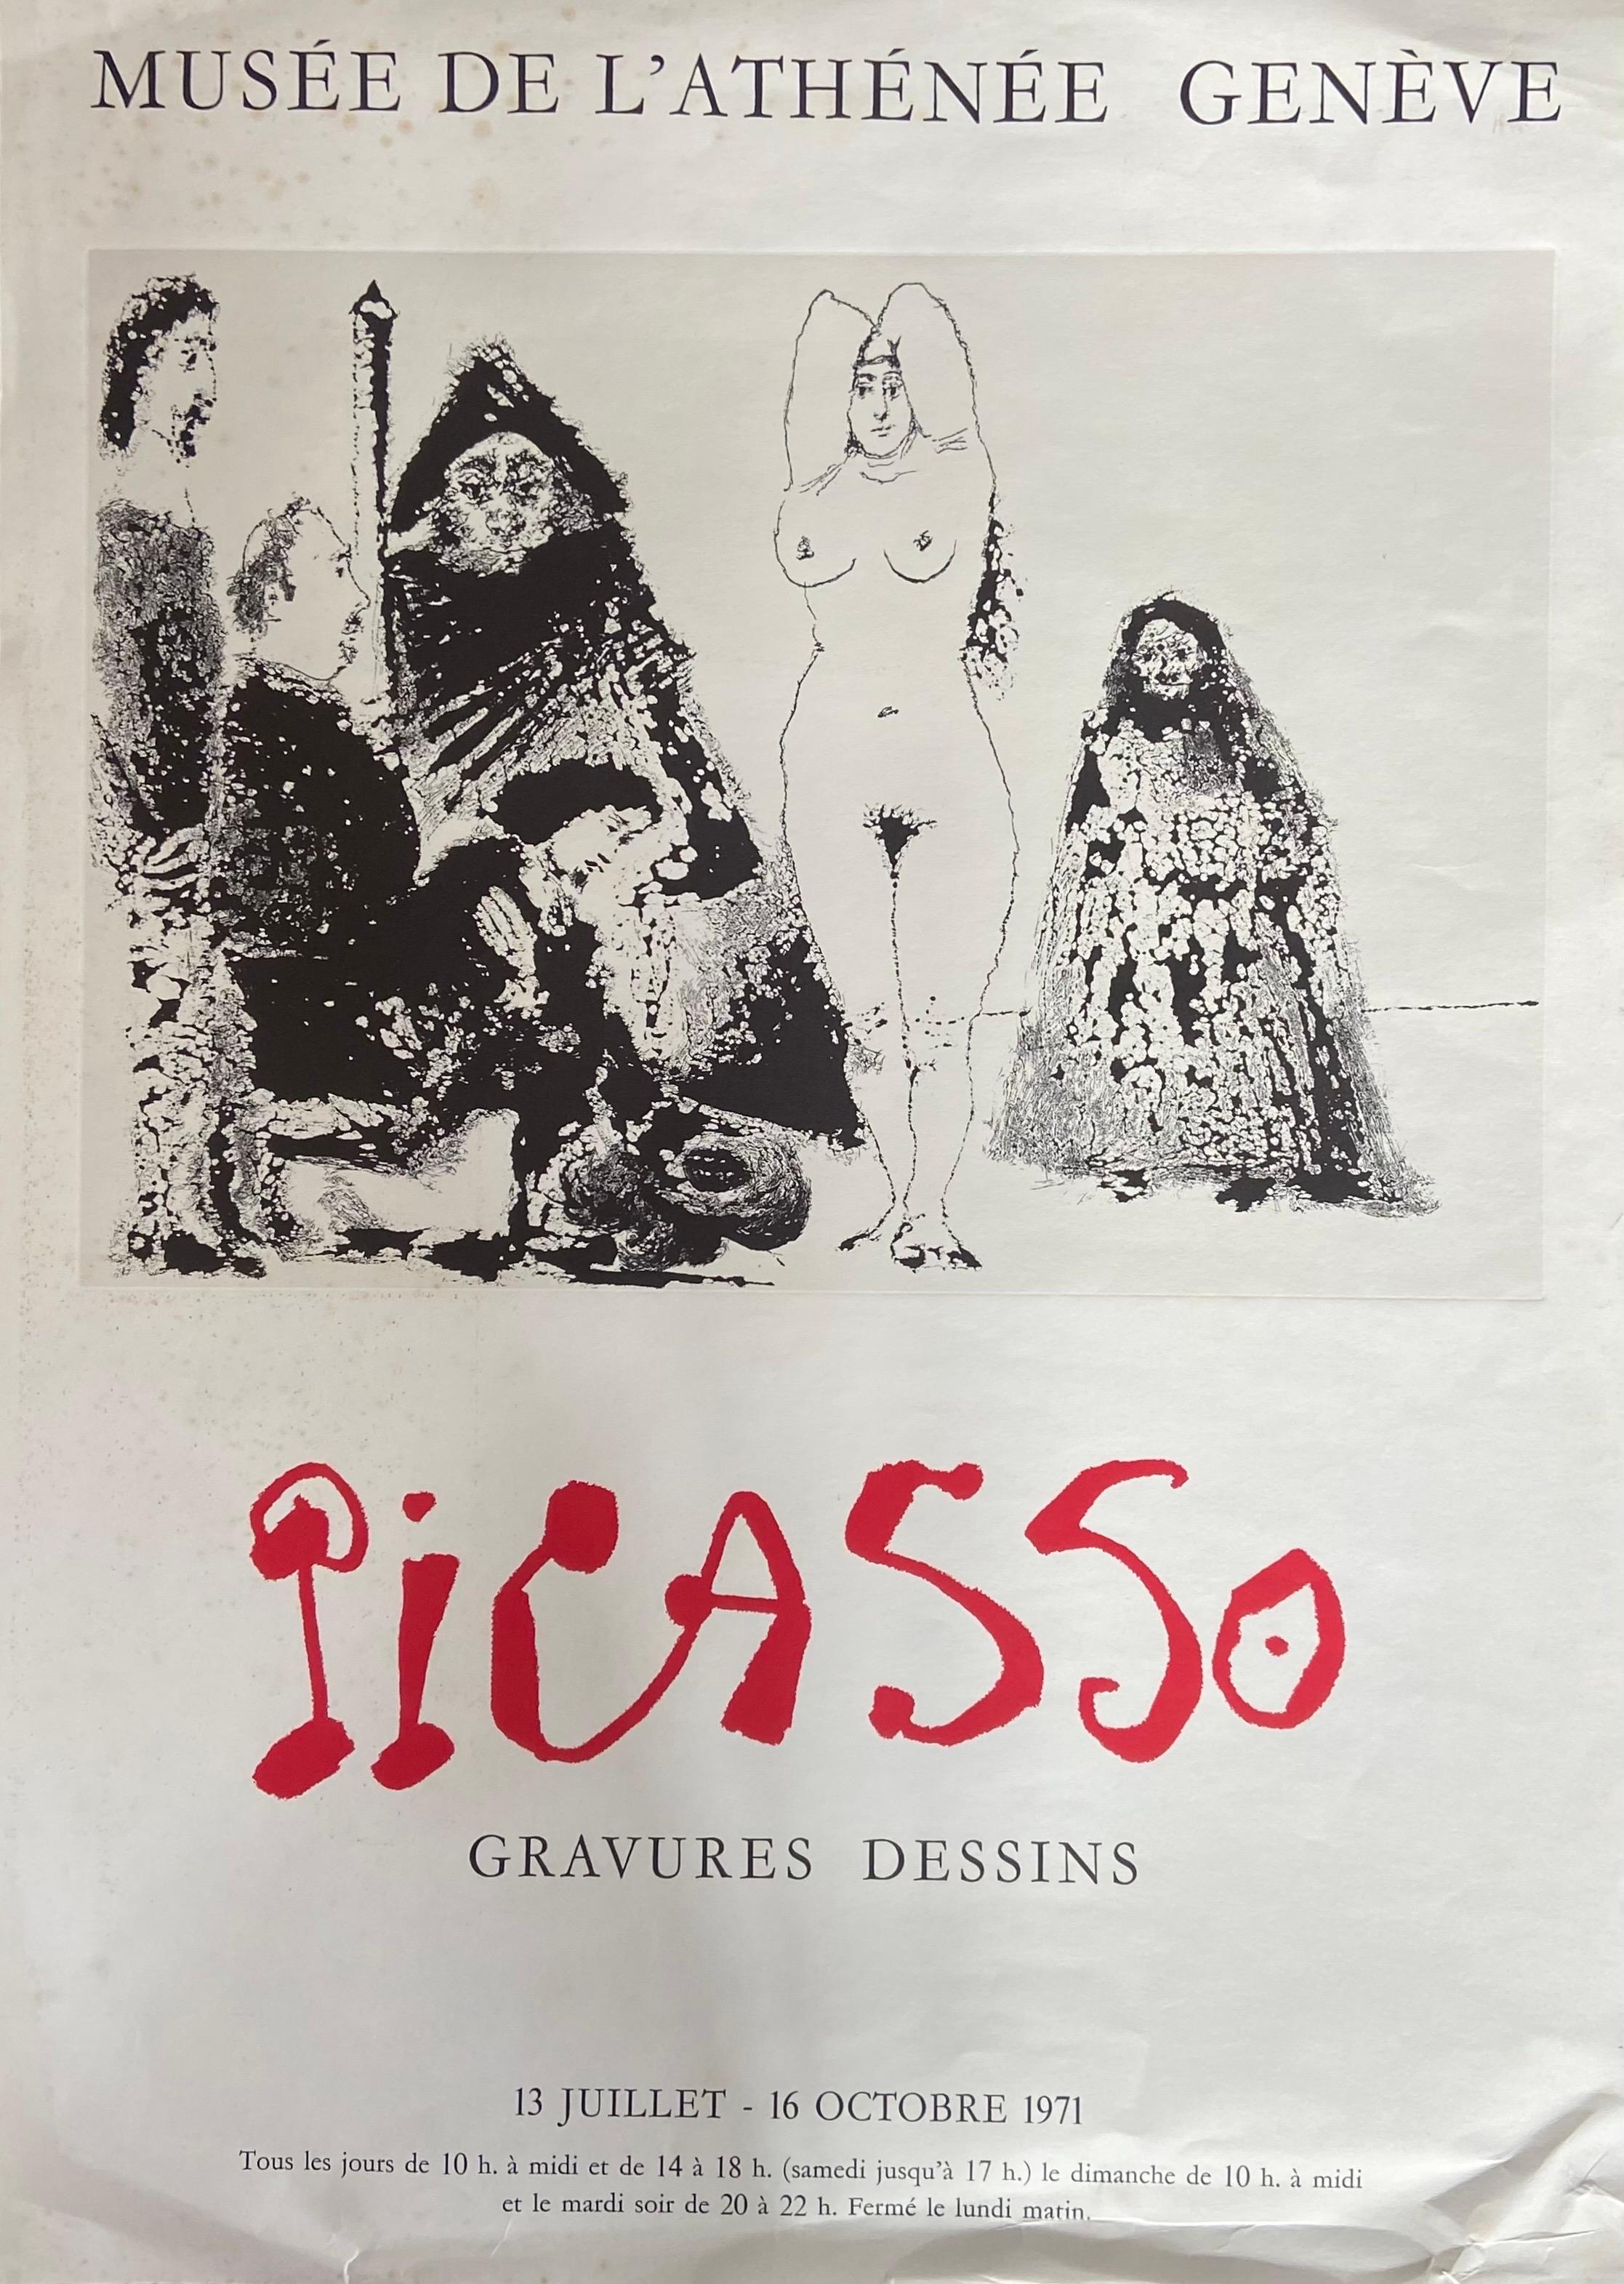 Paper Original Poster for Picasso Exhibition in Geneva back in 1971 For Sale